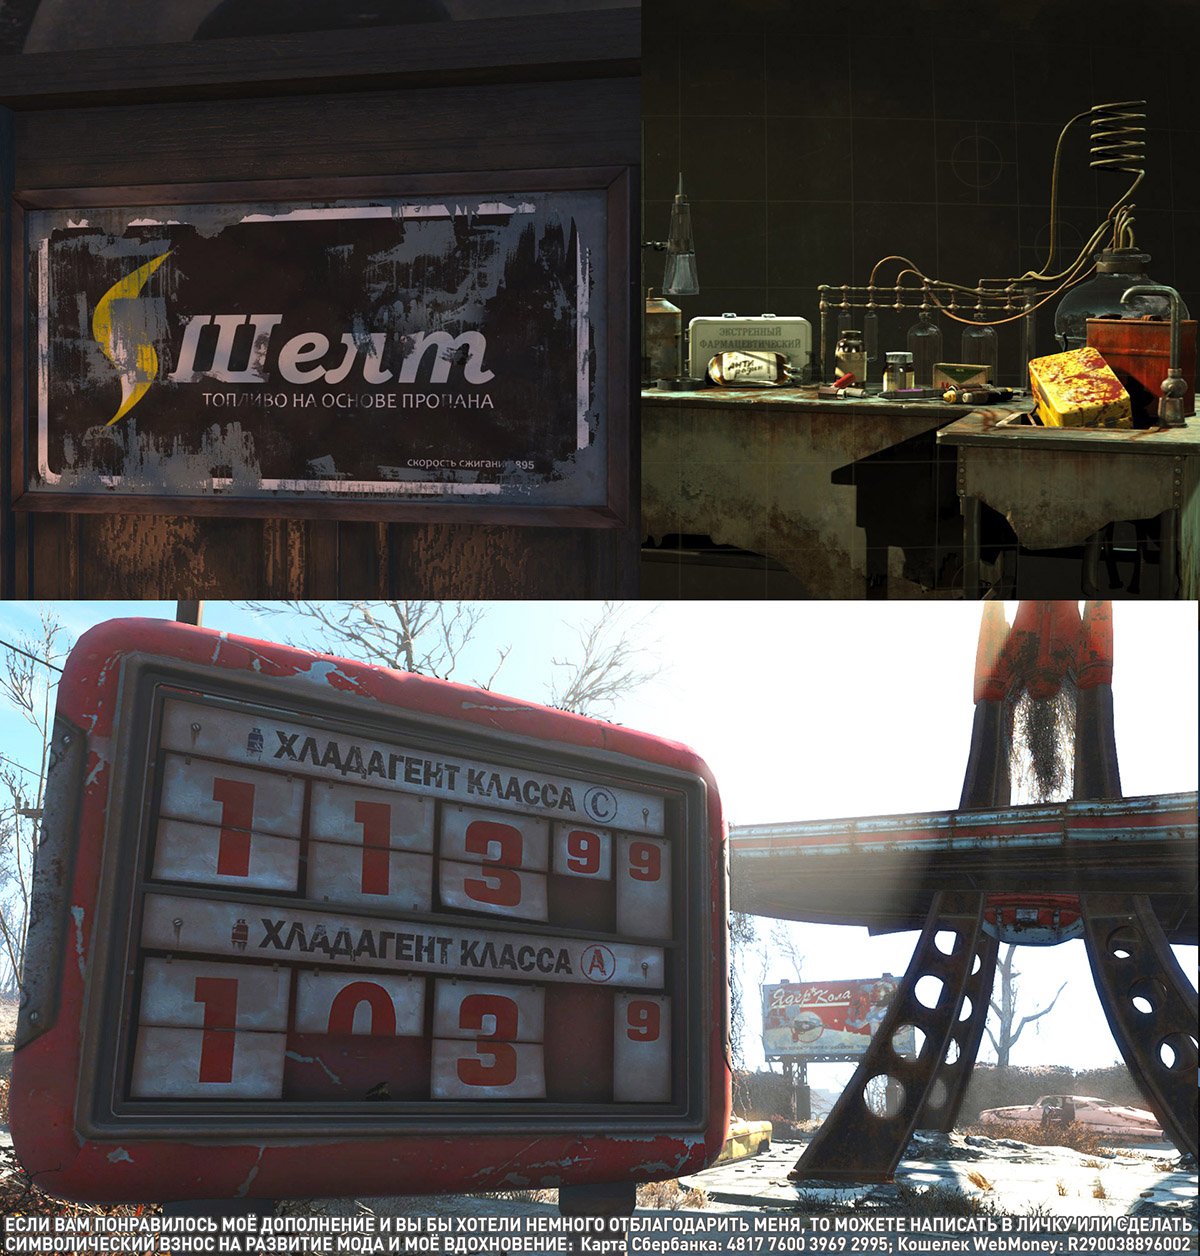 Generator textures from hiro special edition fallout 4 фото 1